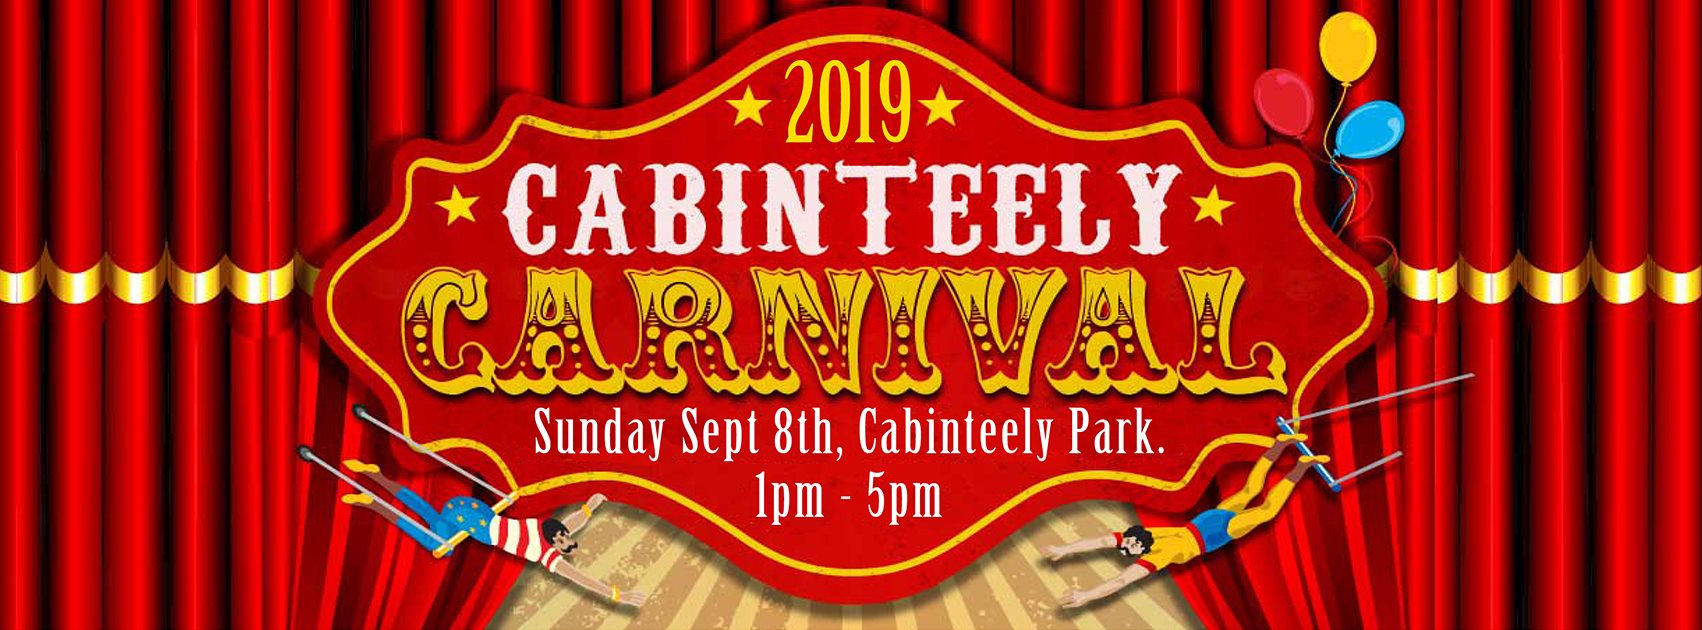 Cabinteely Carnival Returns To Cabinteely Park Sunday Sept 